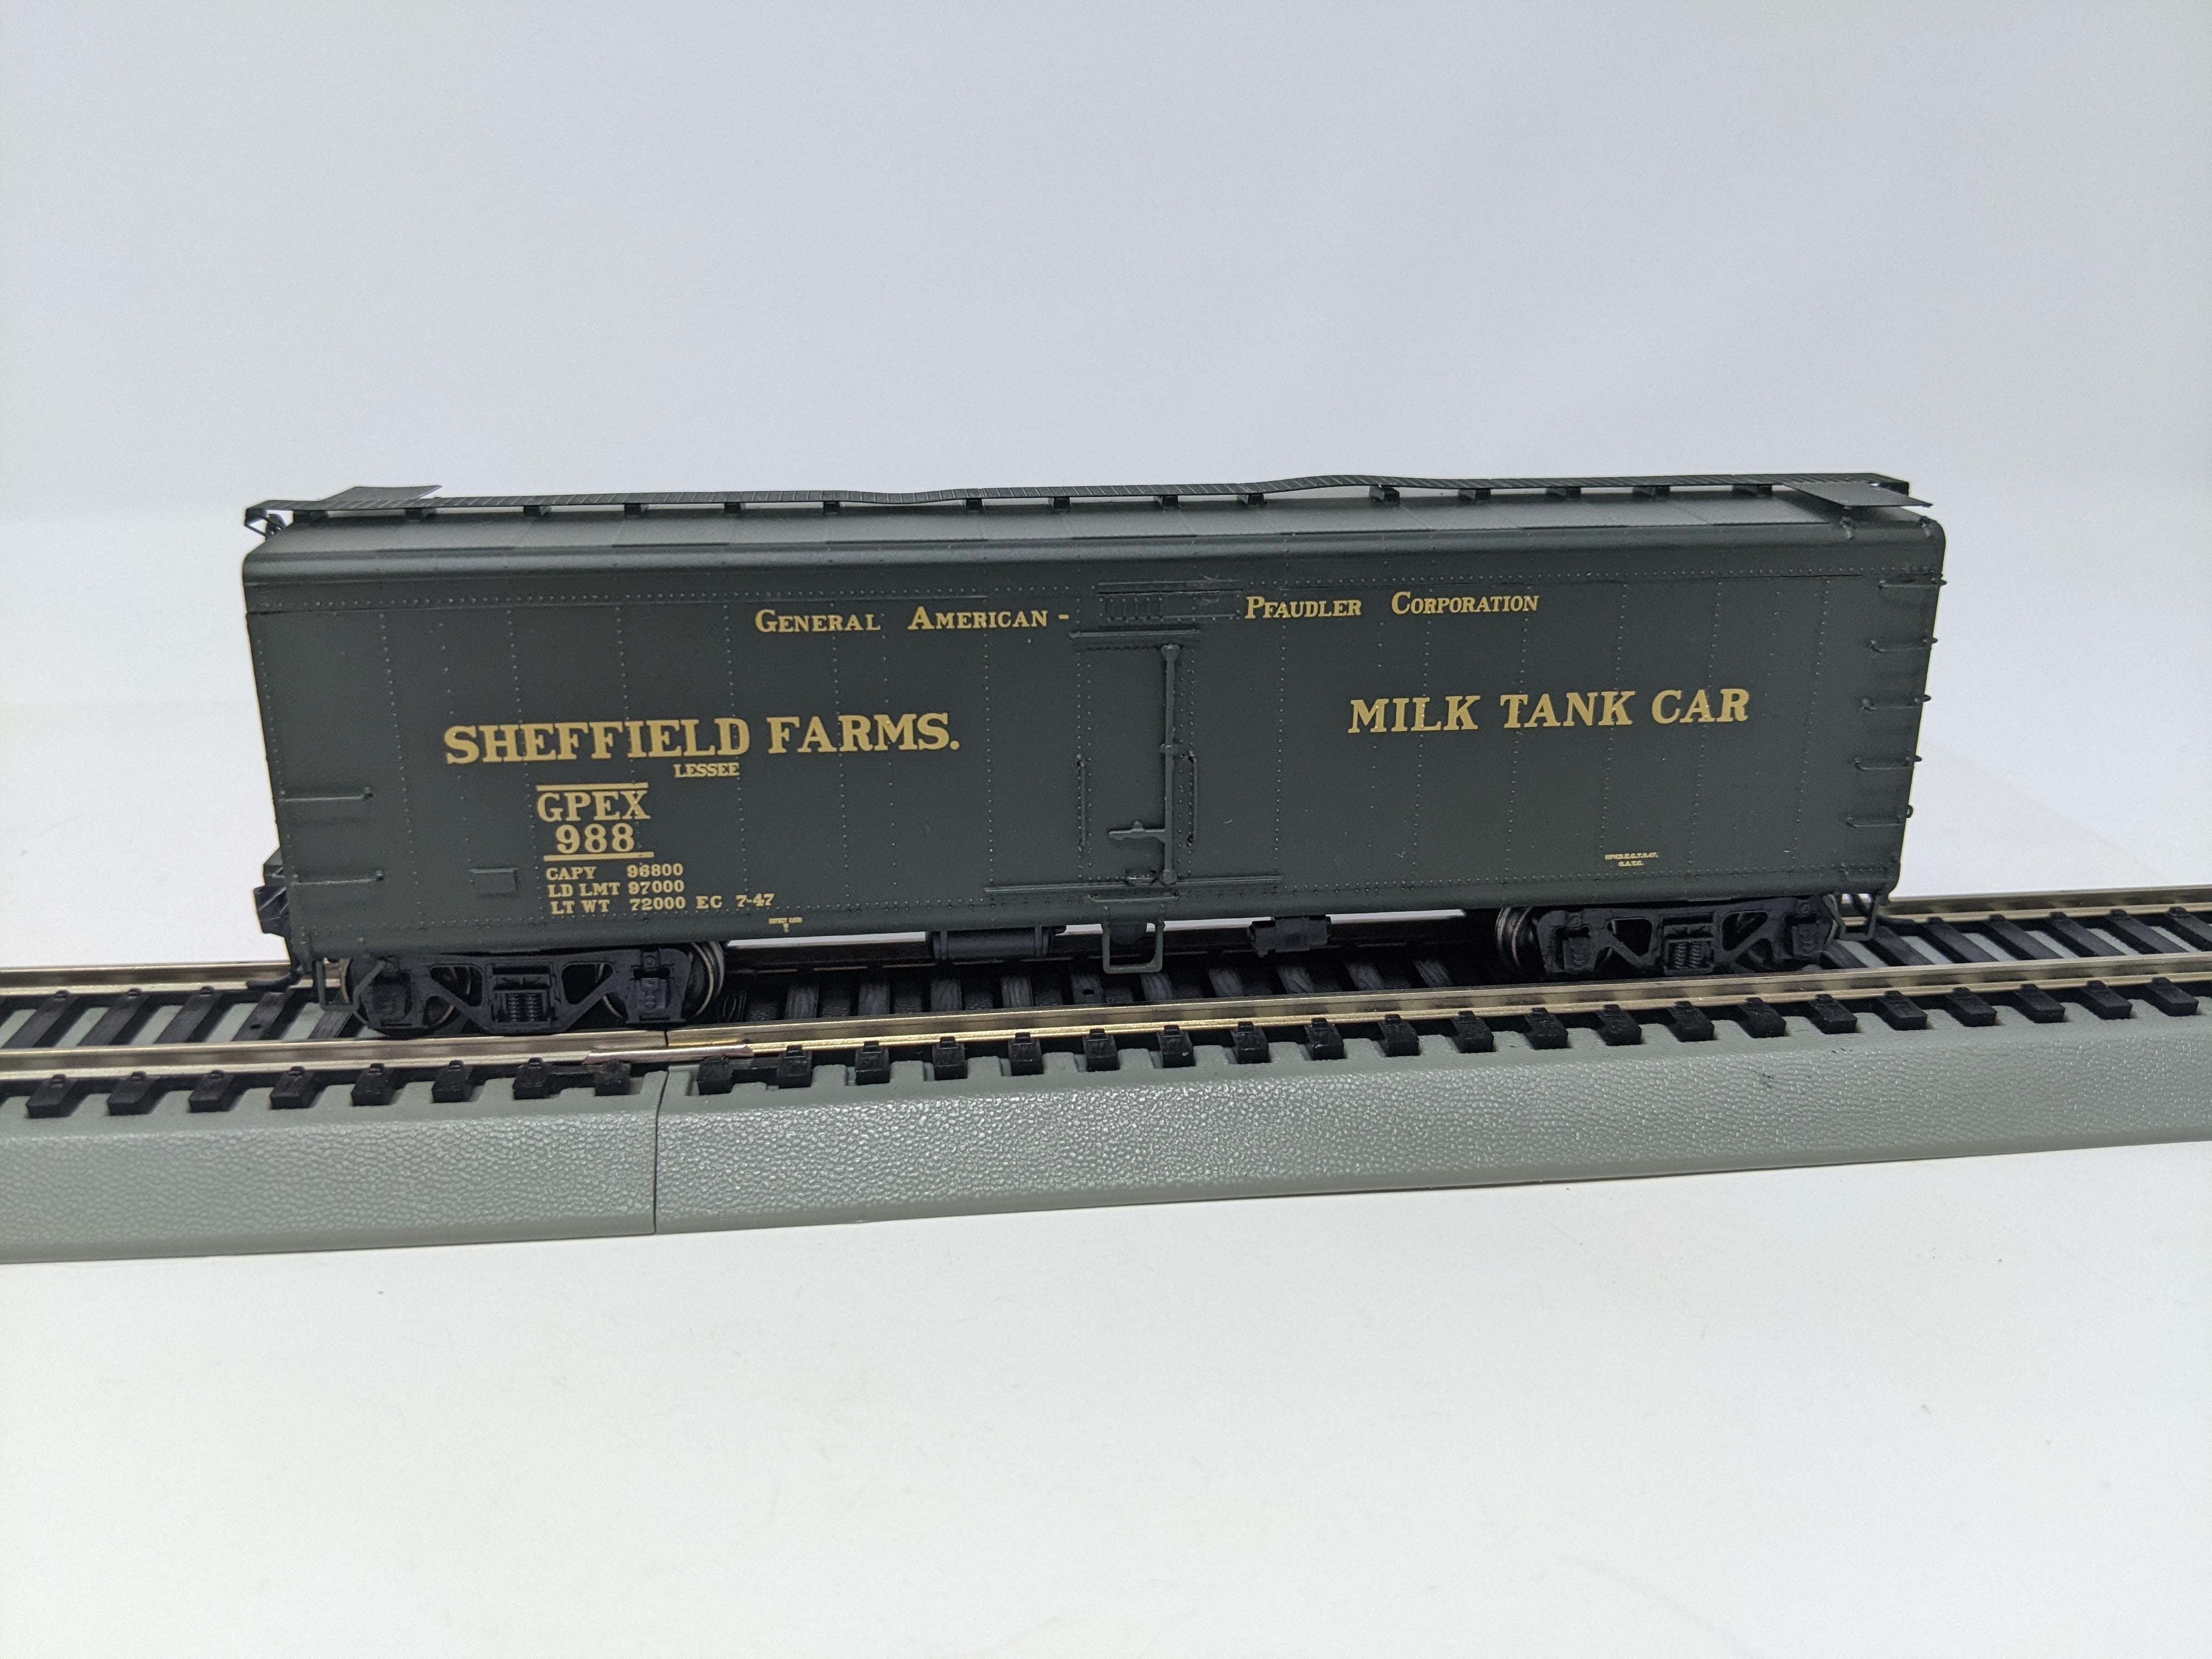 USED Intermountain 48204-02 HO Scale, 40' Milk Tank Car, General American Pfaudler Corp GPEX #988, Sheffield Farms